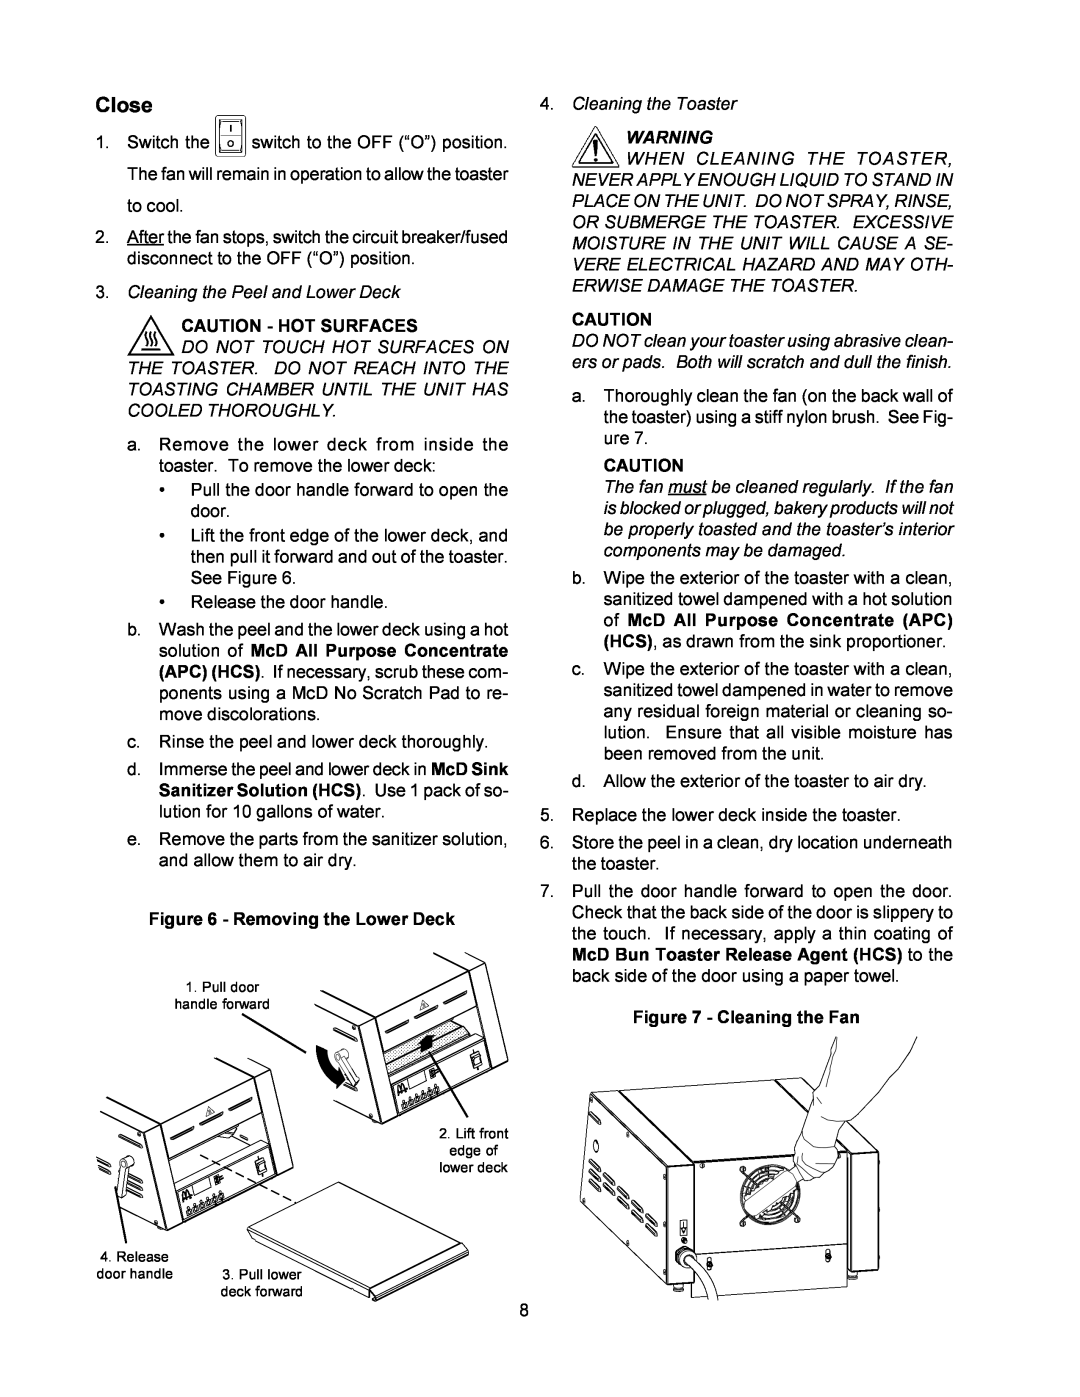 Toastmaster MBT240, MBT208 warranty Close, Removing the Lower Deck, Cleaning the Fan, Caution - Hot Surfaces 